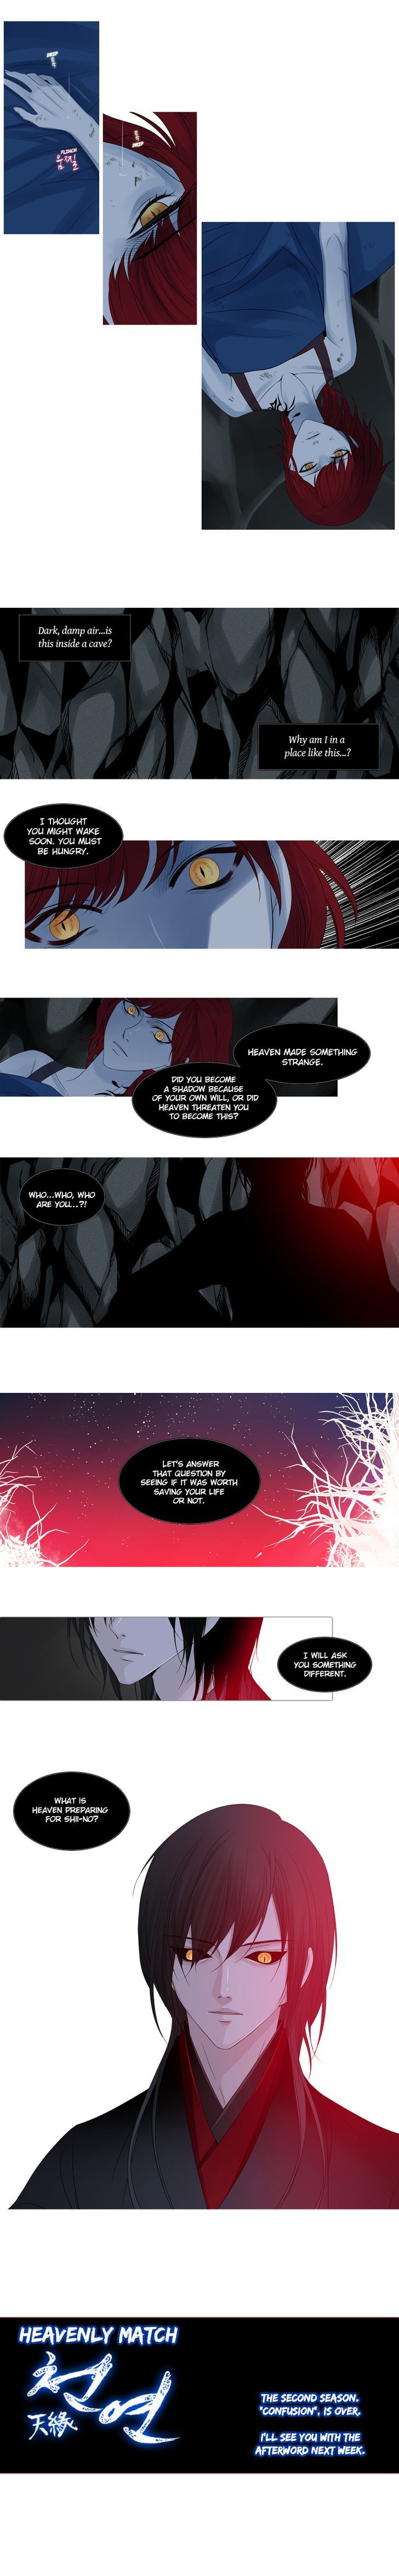 Heavenly Match Chapter 64 Page 5